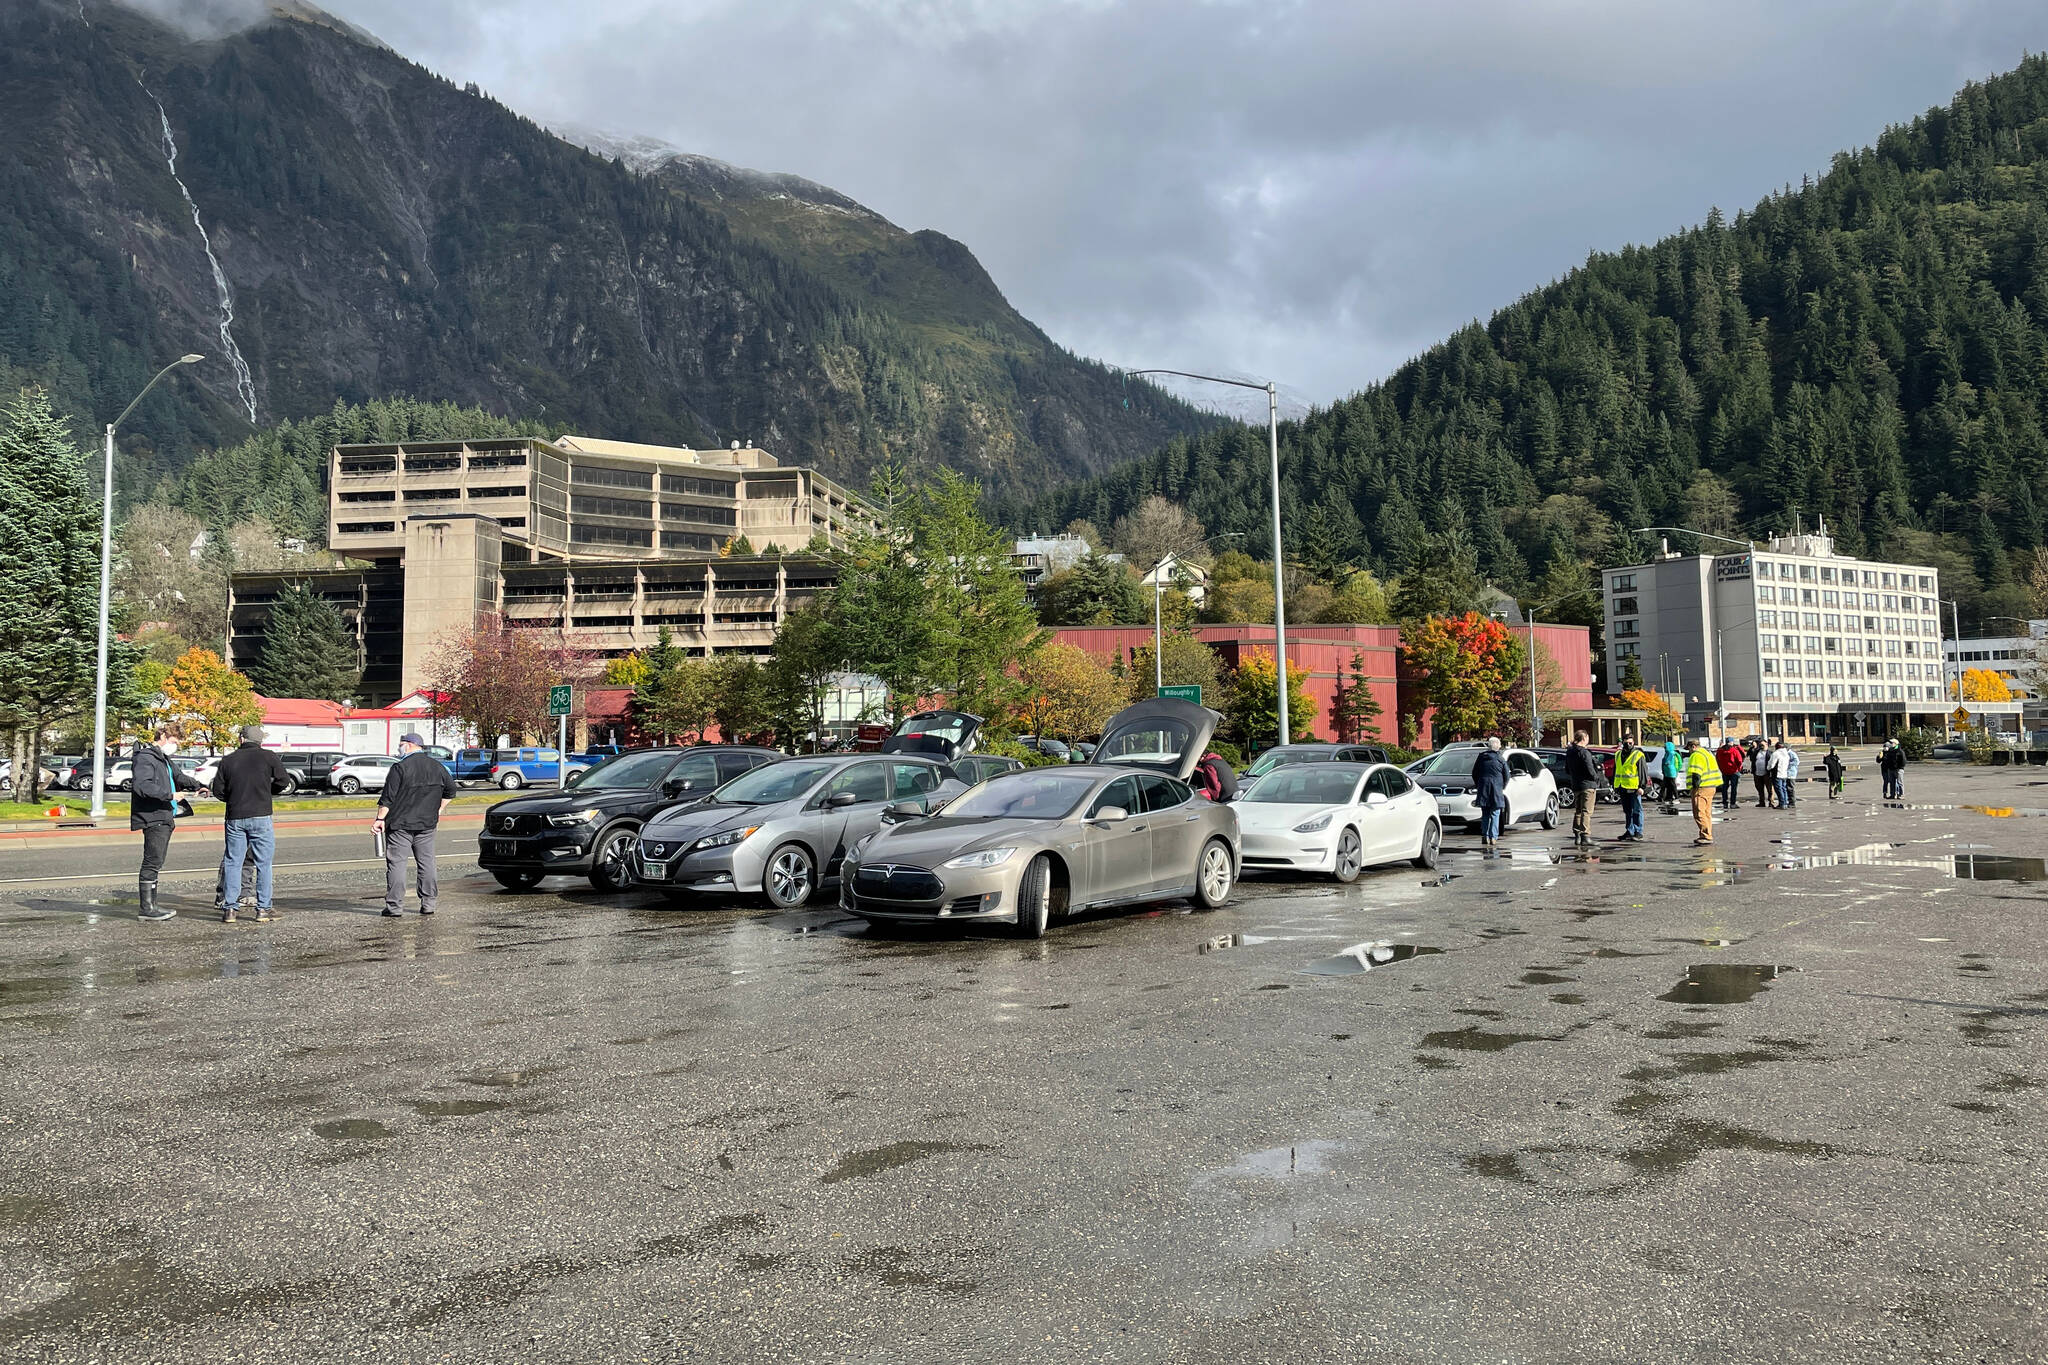 Michael S. Lockett / Juneau Empire
The Juneau Electric Vehicle Association held its eighth annual meet-up for National Drive Electric Week on Saturday.